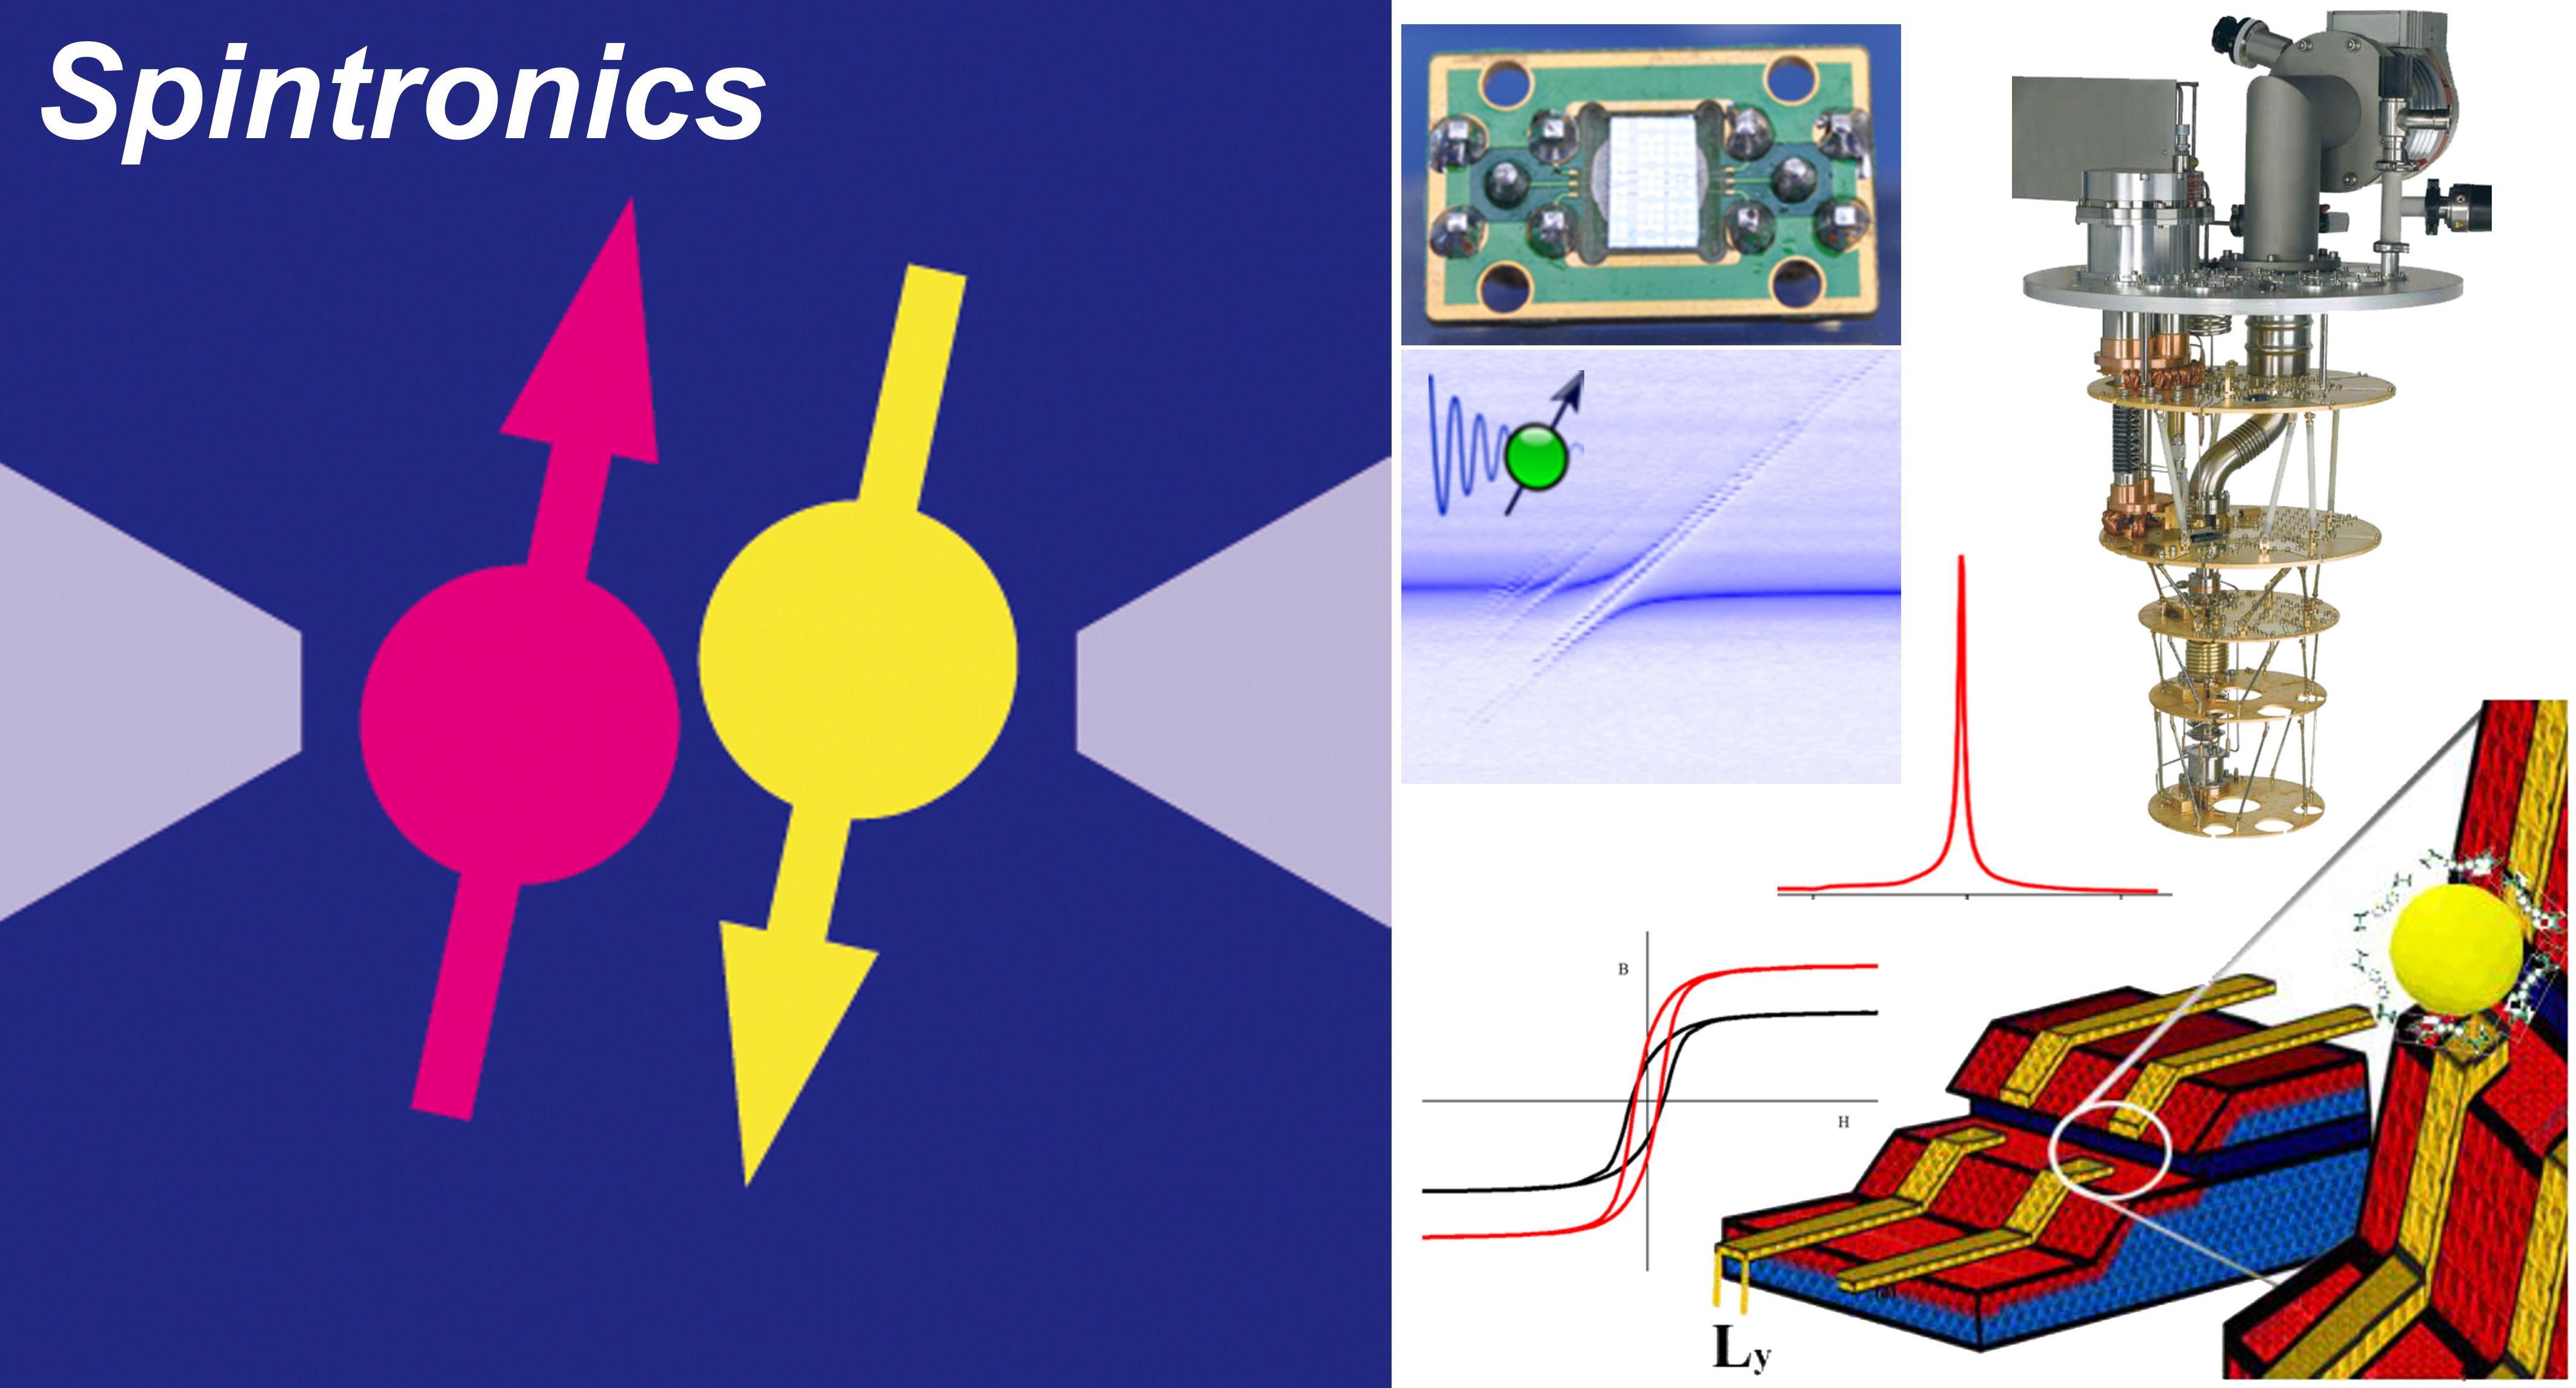 __Spintronics Entry